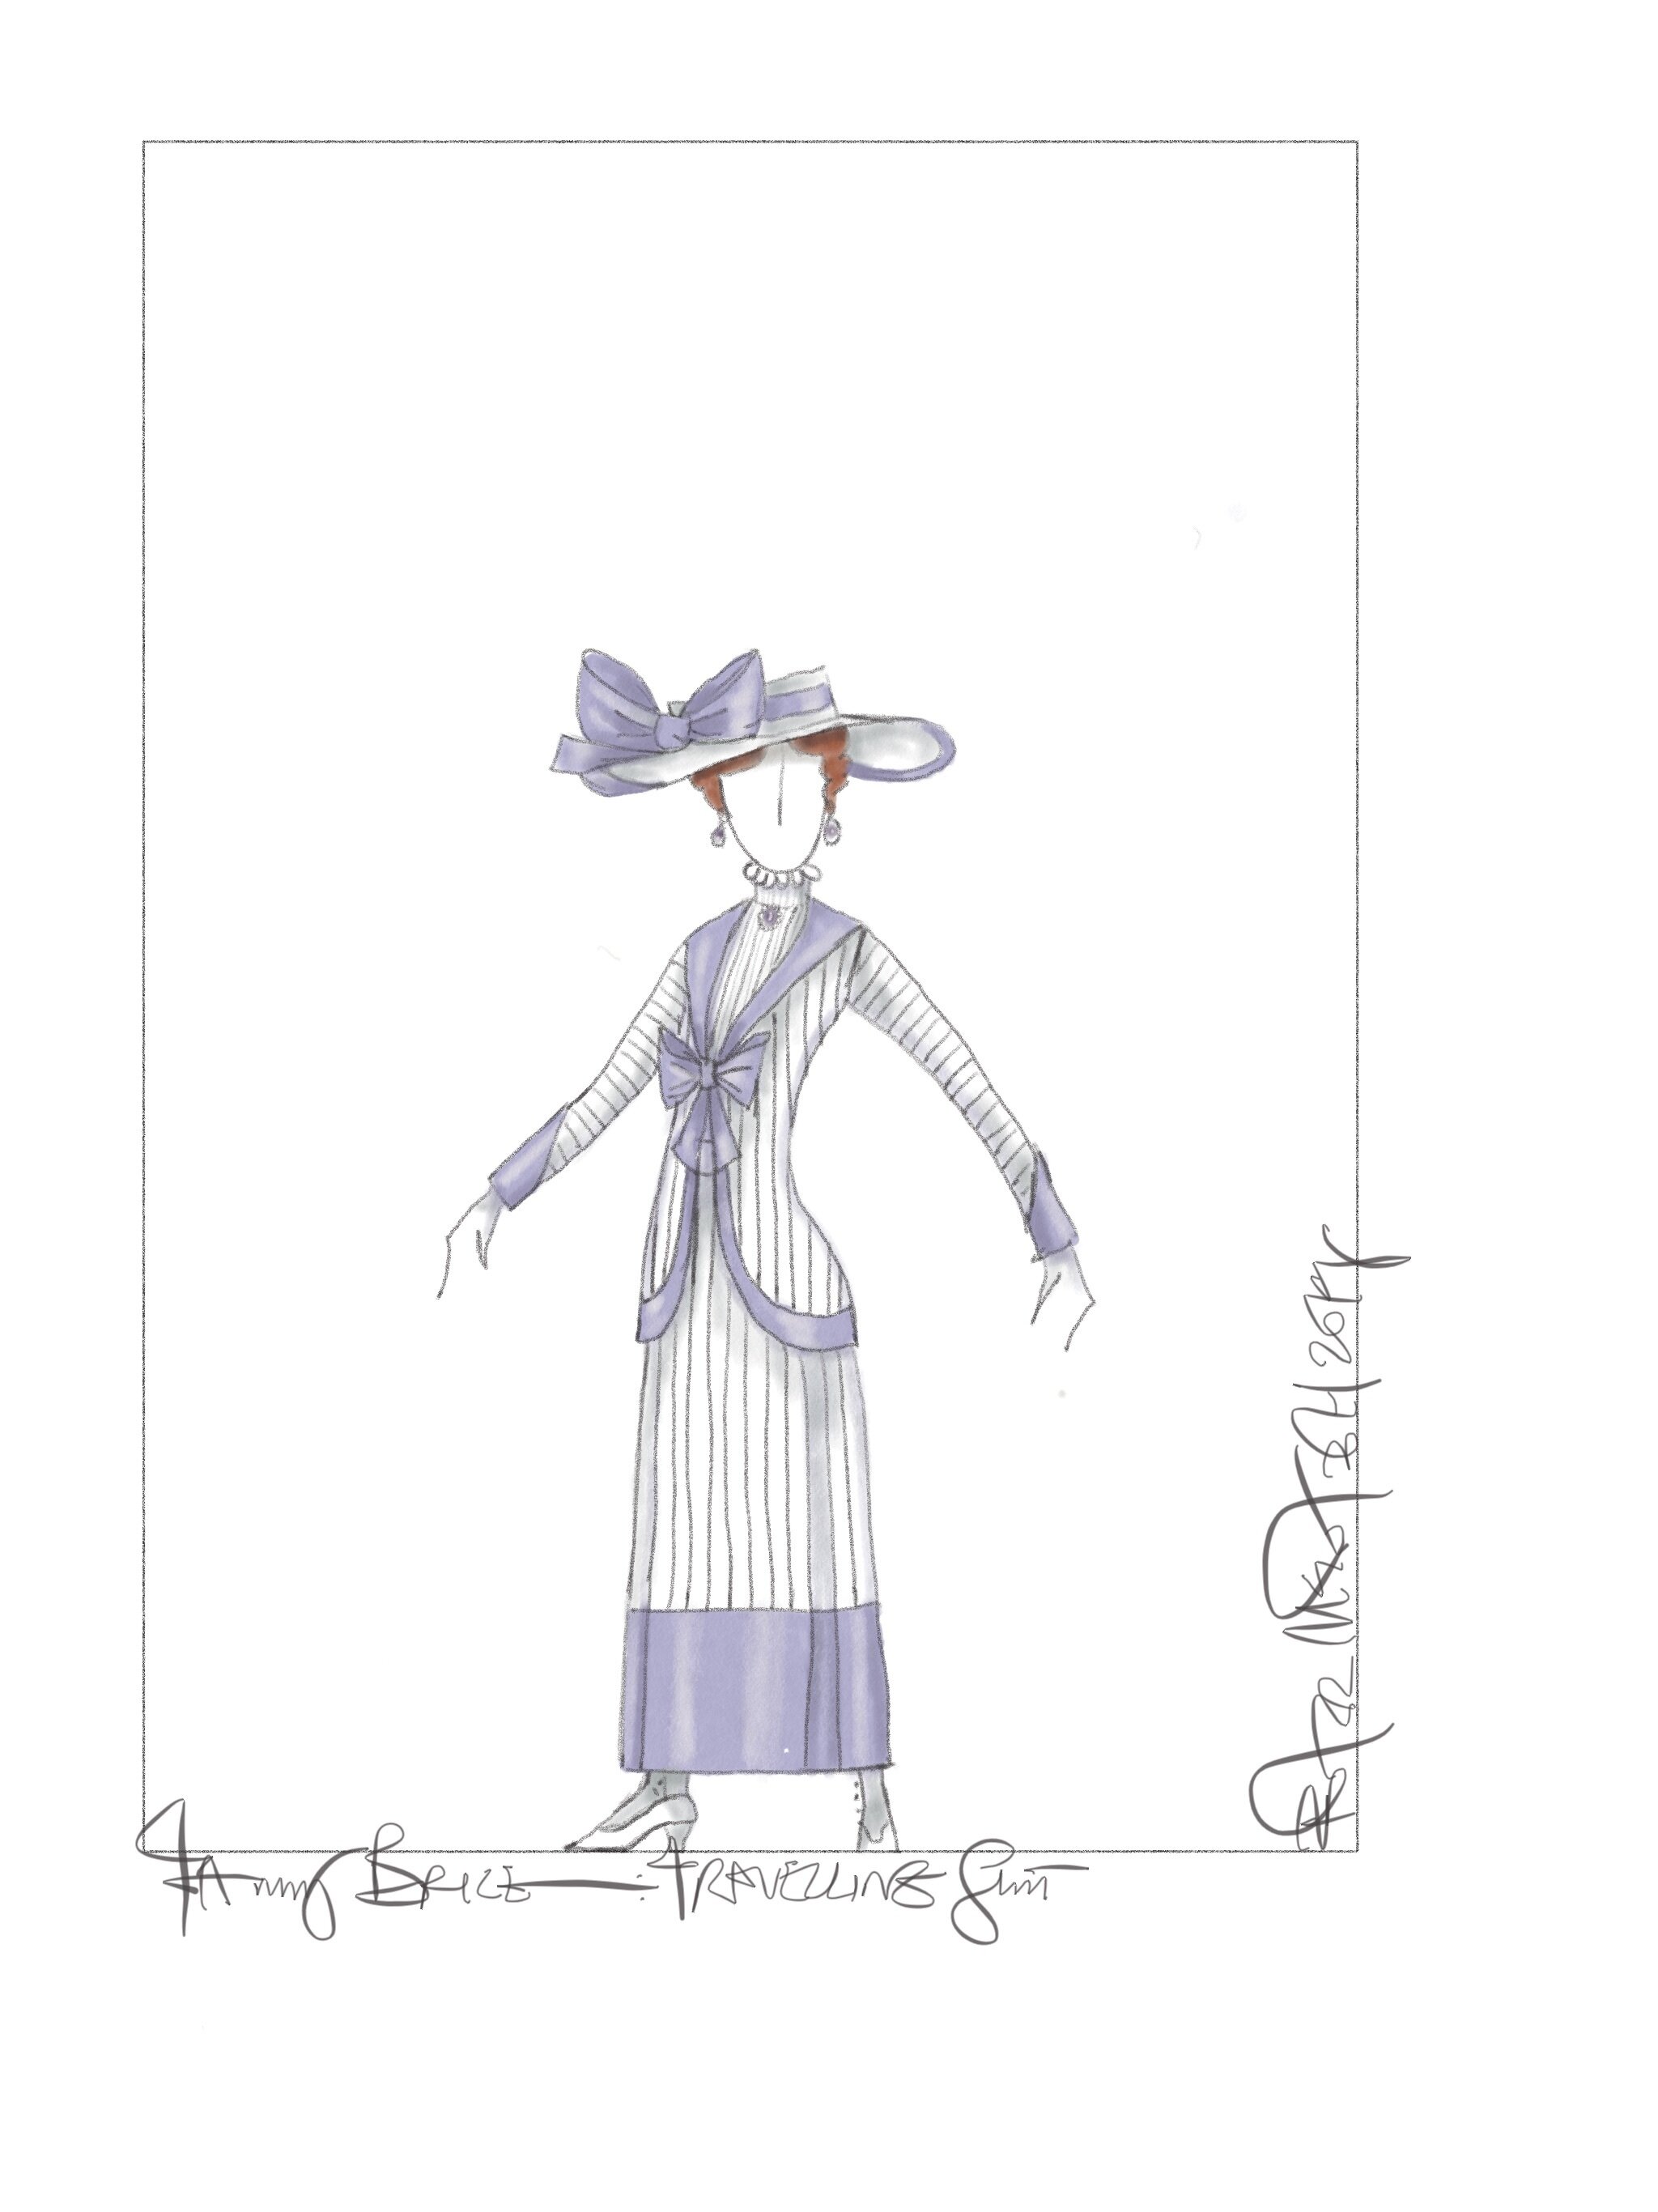 Funny Girl - costume drawing 1 (Concepts sketch).jpg